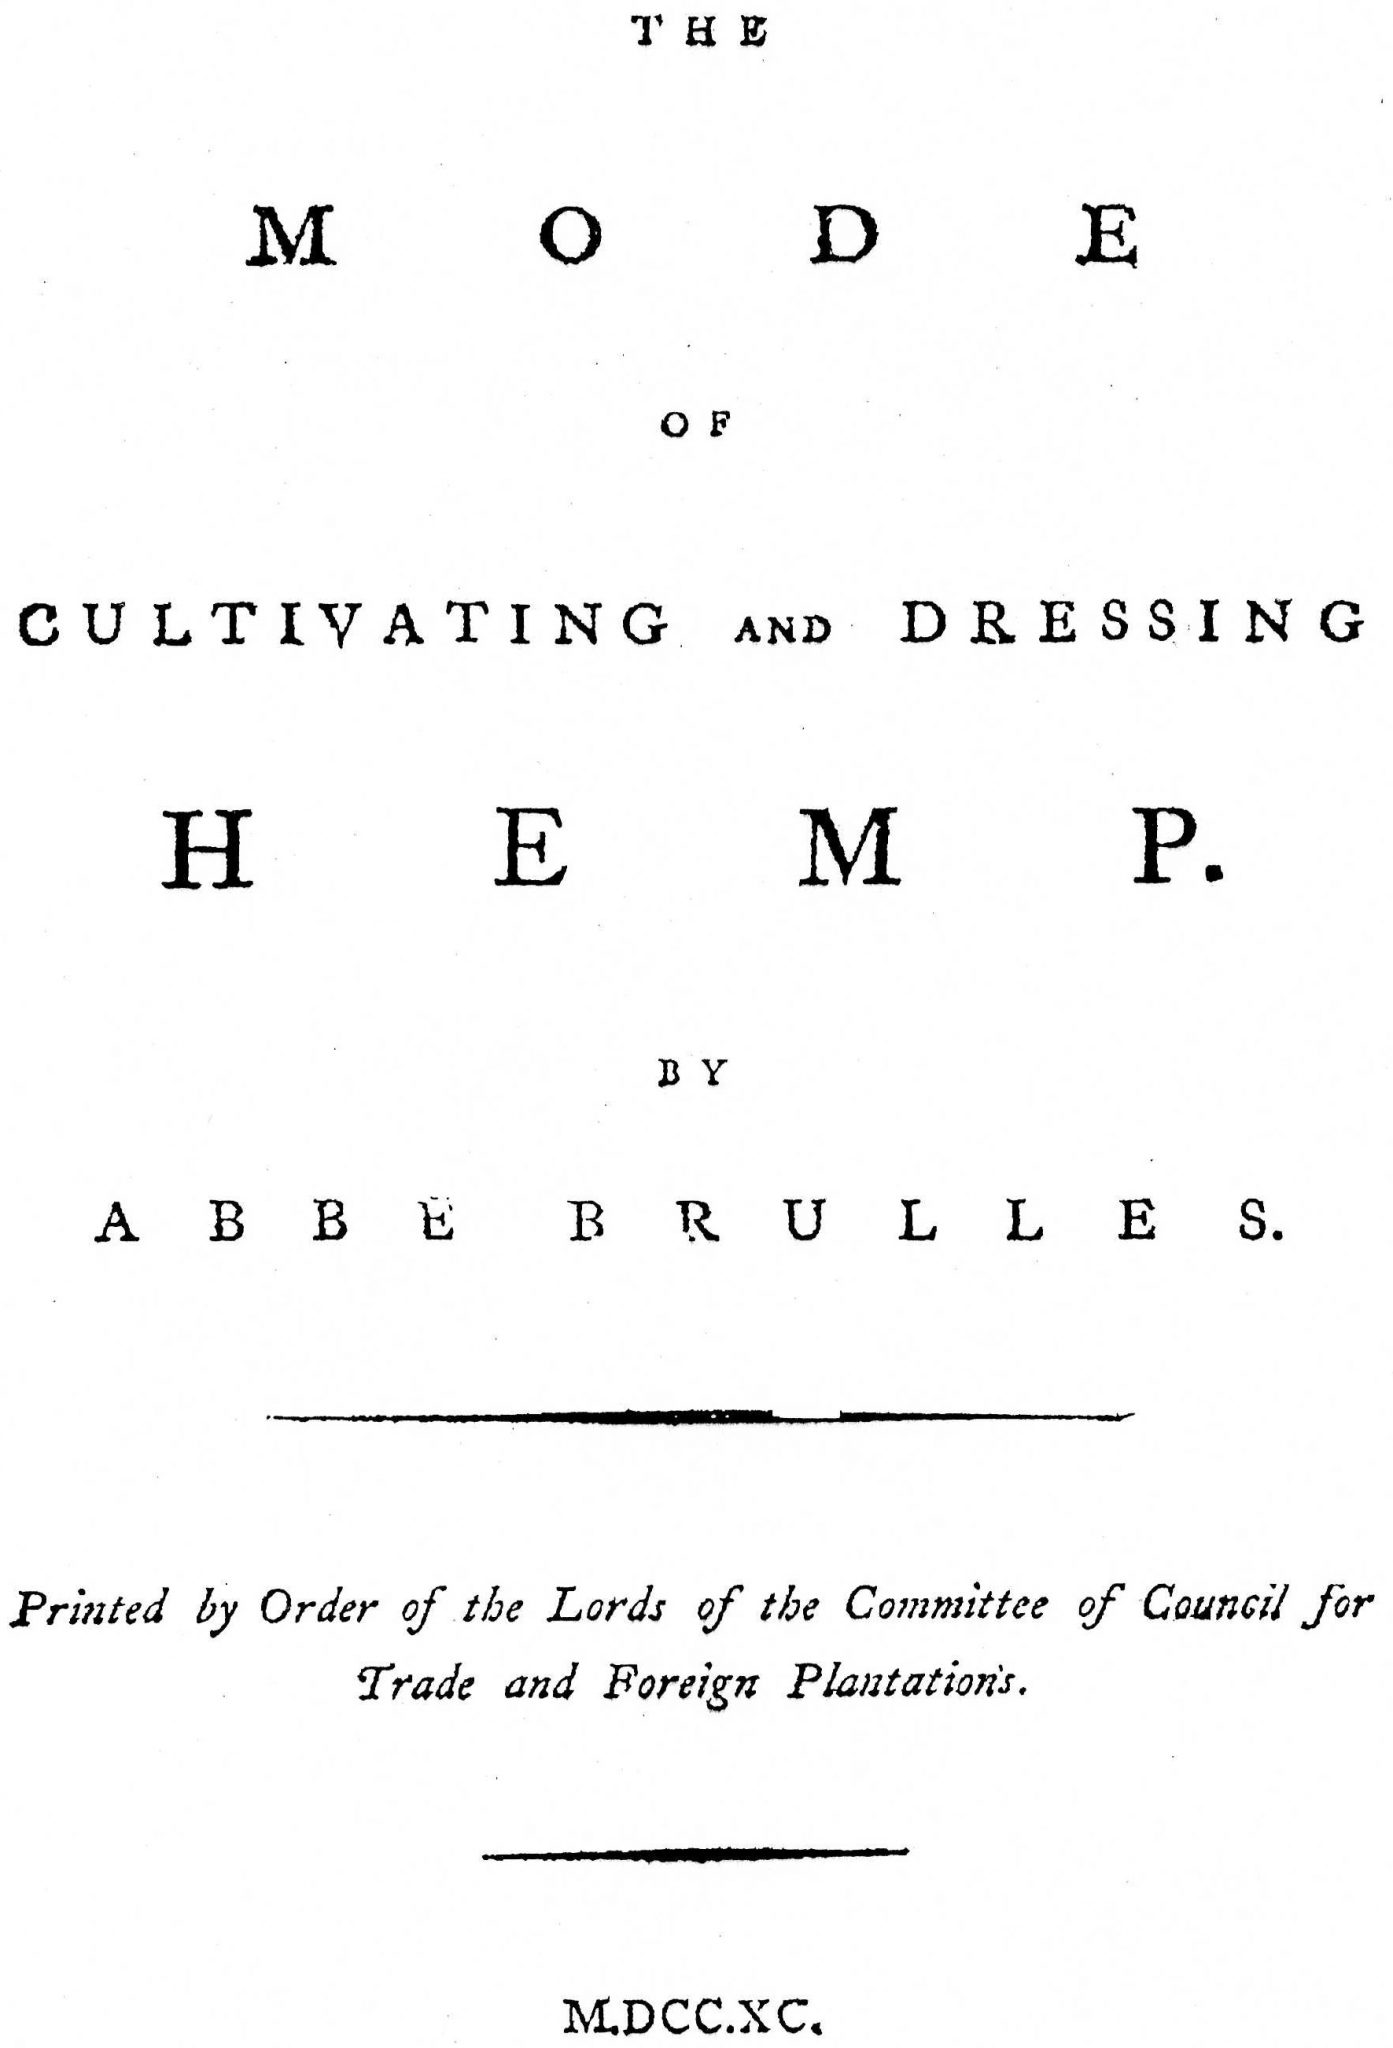 Mode for the cultivating and Dressing Hemp by Abbe Brulles, London, 1790